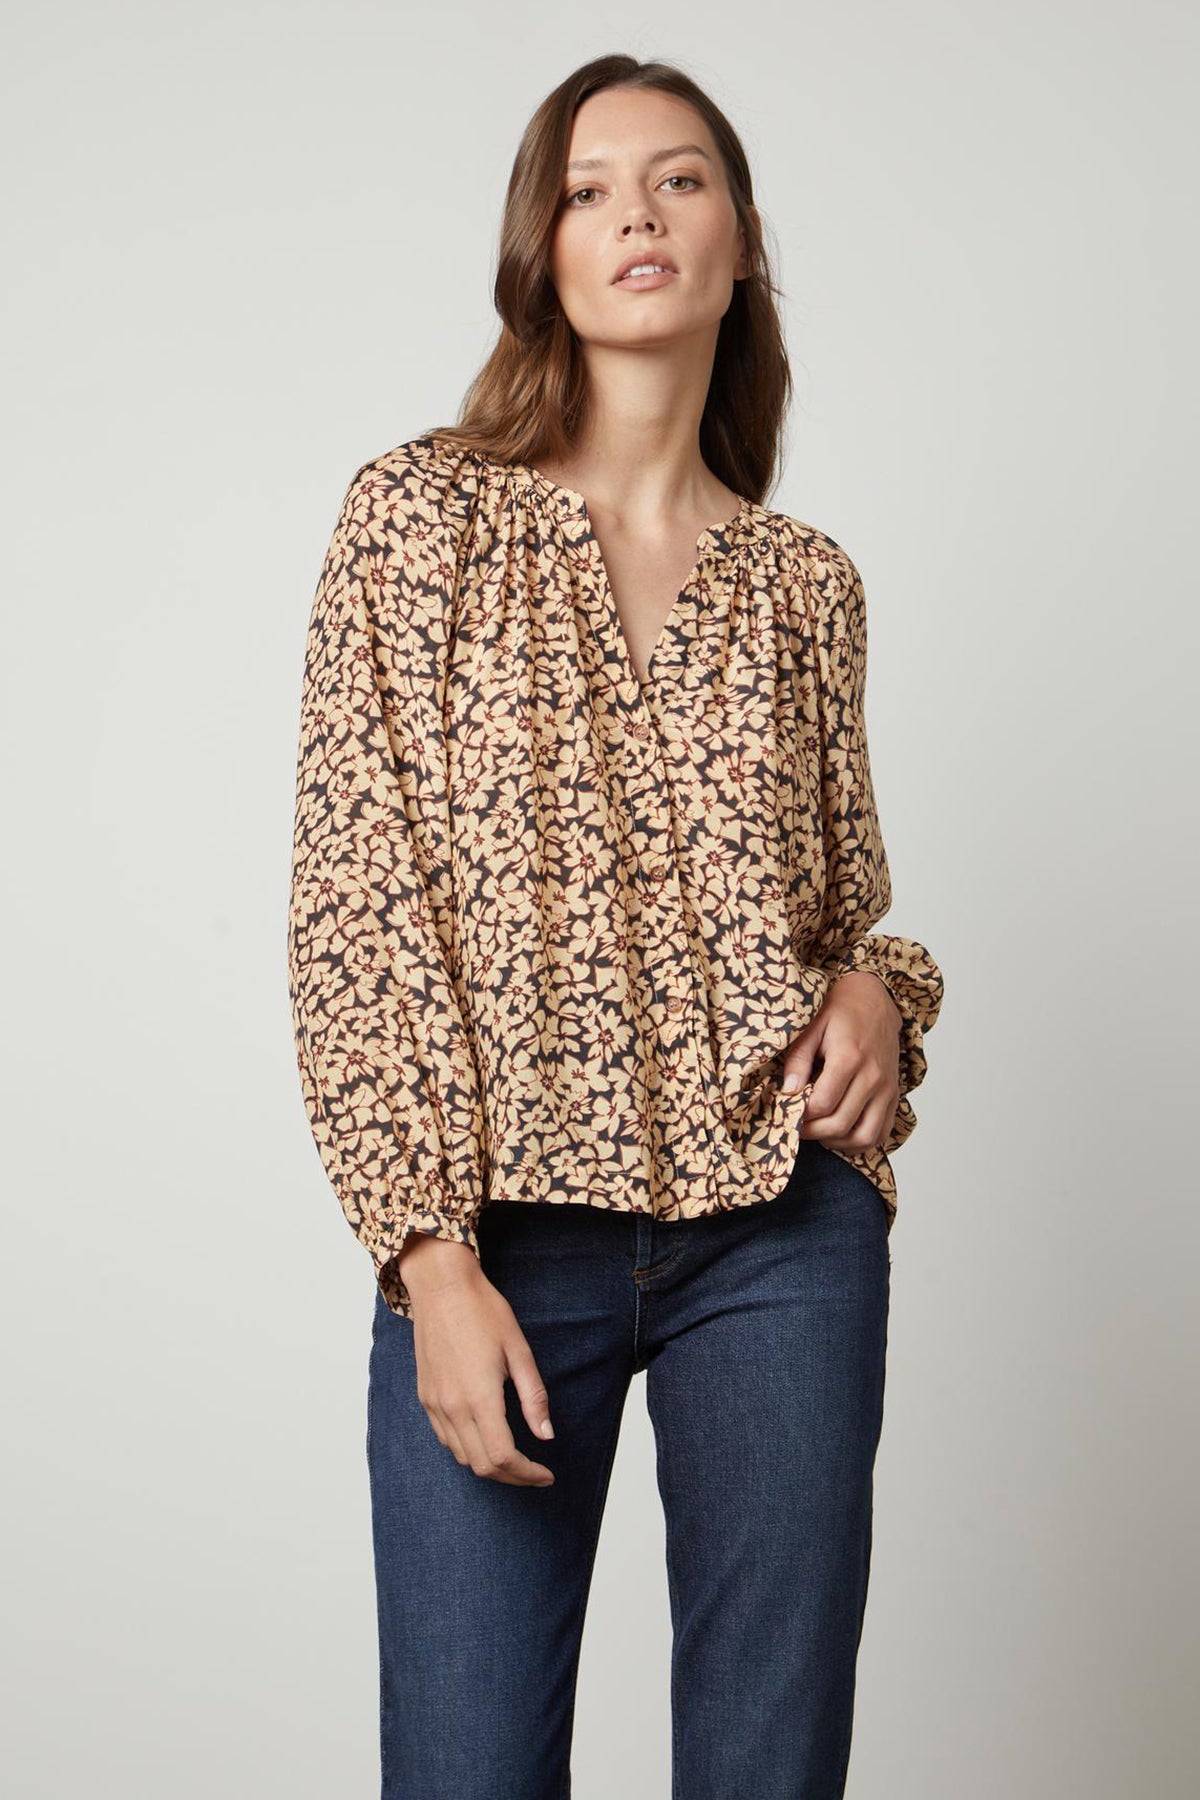   A person wearing jeans and a MELINDA PRINTED BUTTON-UP TOP by Velvet by Graham & Spencer with a leopard print. 